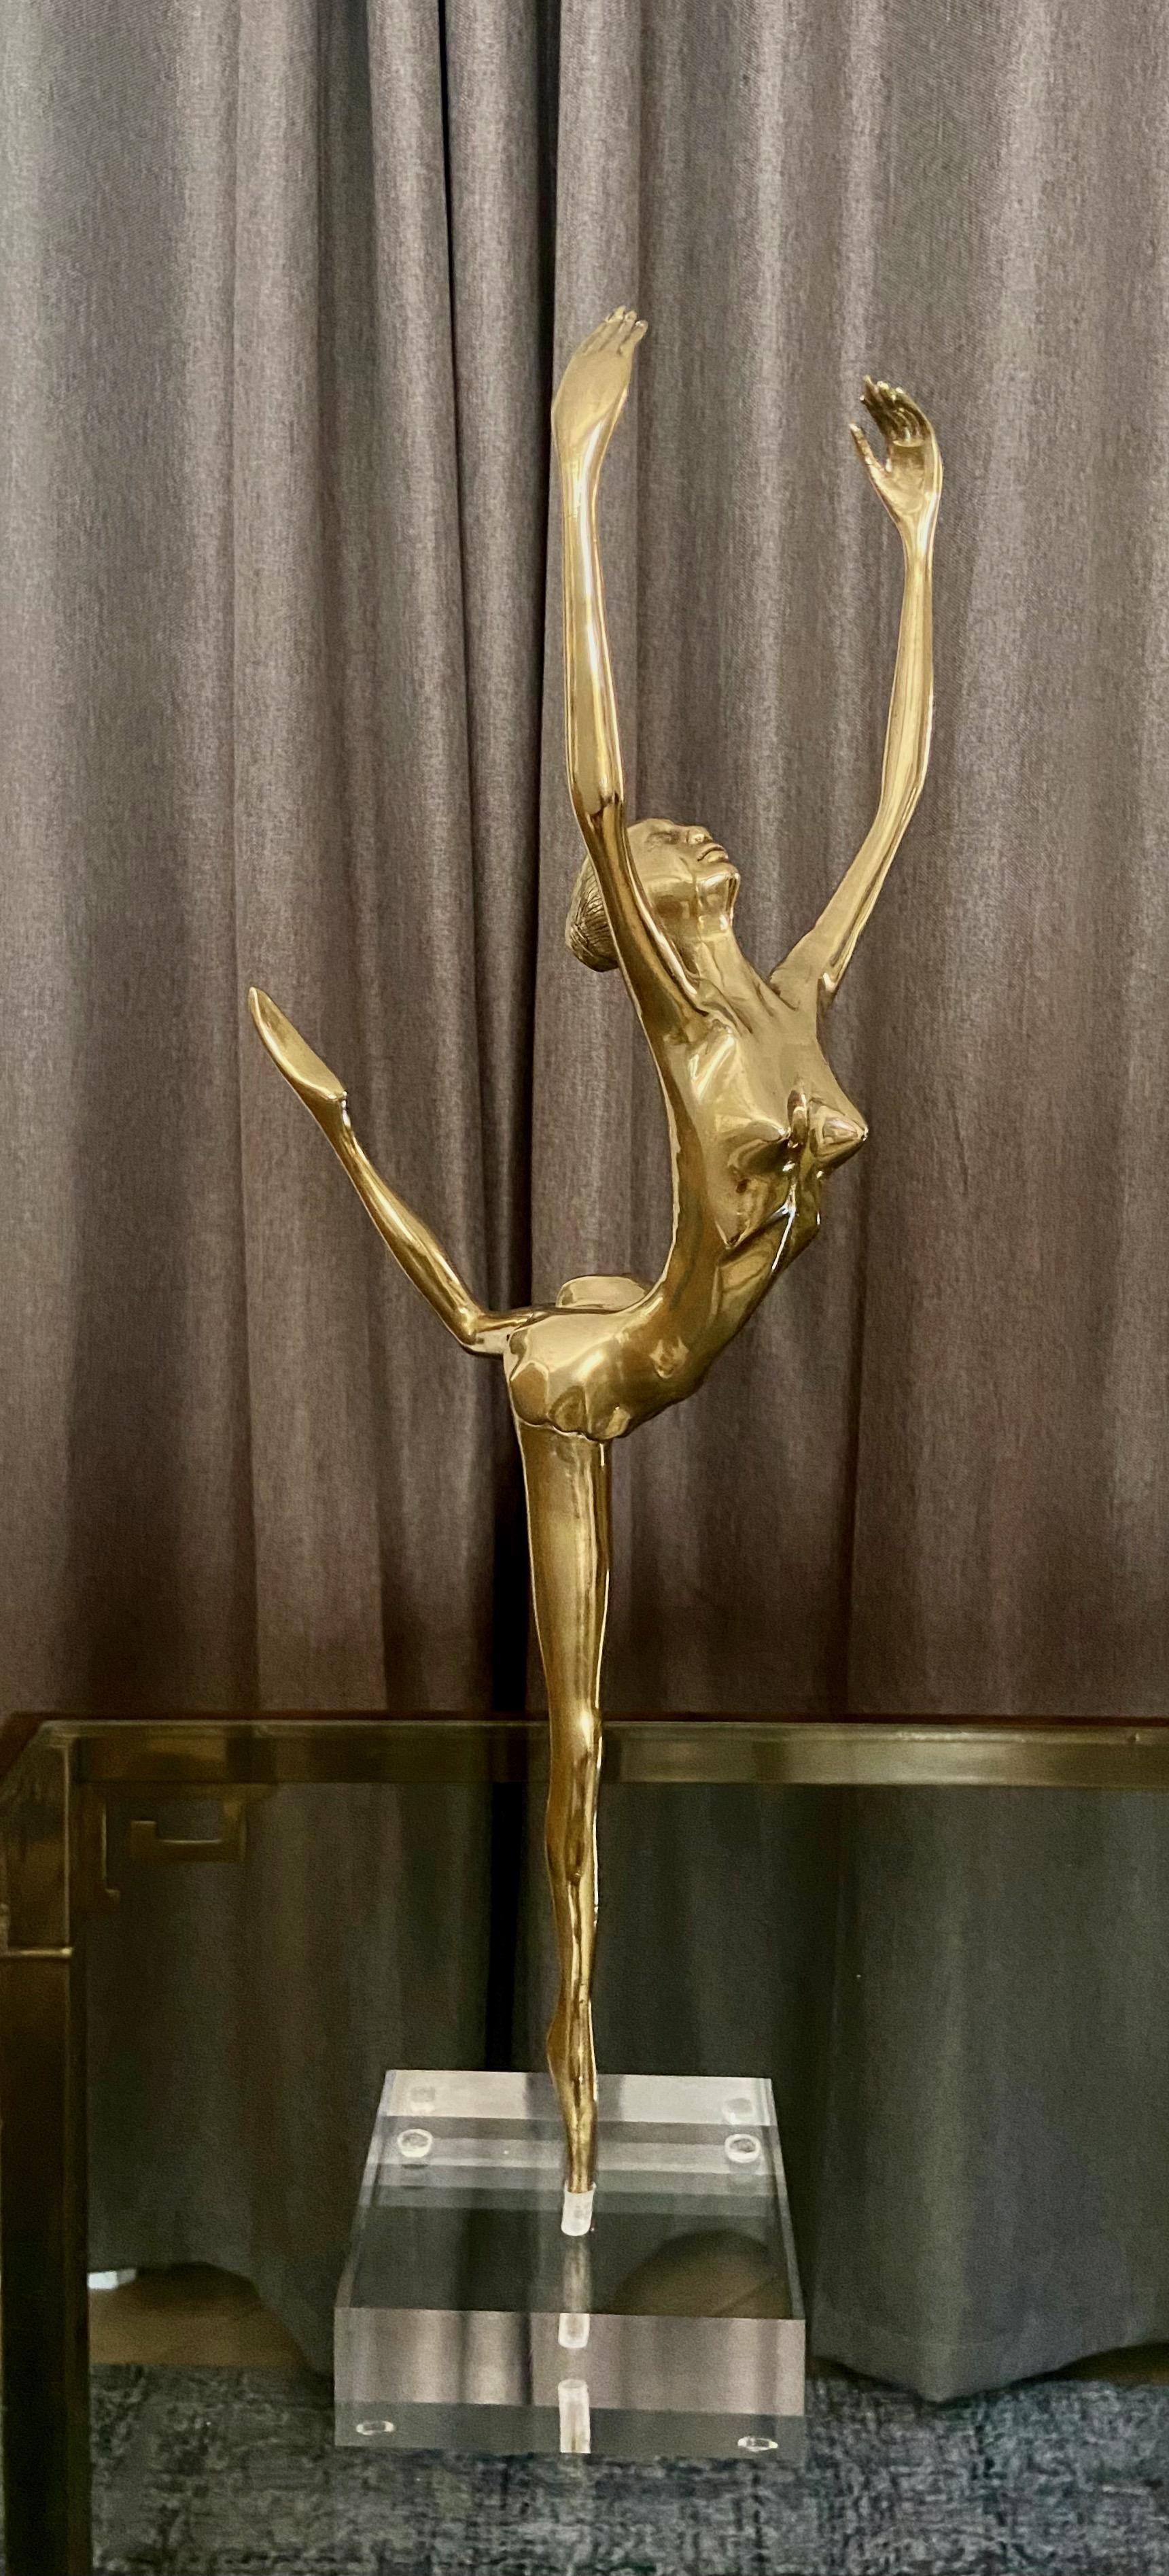 An inspiring and graceful stylized brass ballerina dancer statue mounted on an acrylic stand. Her facial expression and elongated hands and fingers are beautifully detailed. Made during deco era.